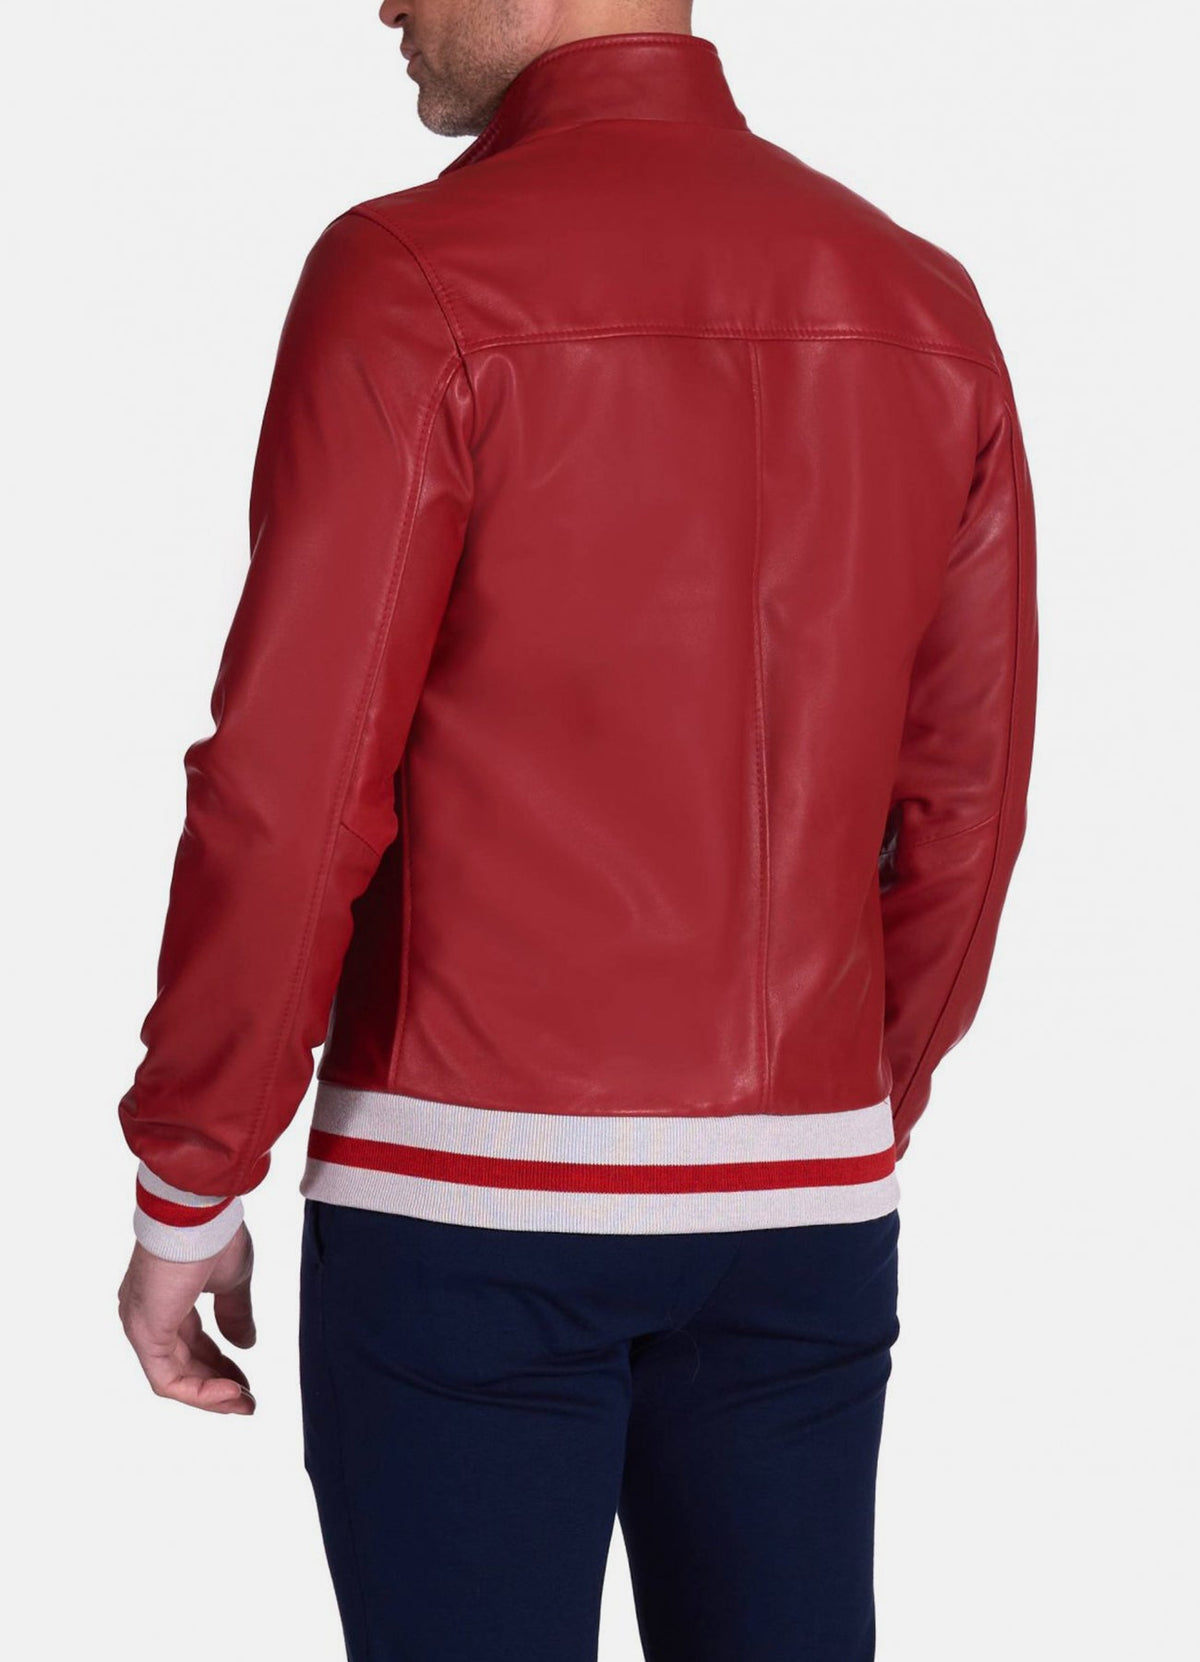 Mens Authentic Red Bomber Leather Jacket